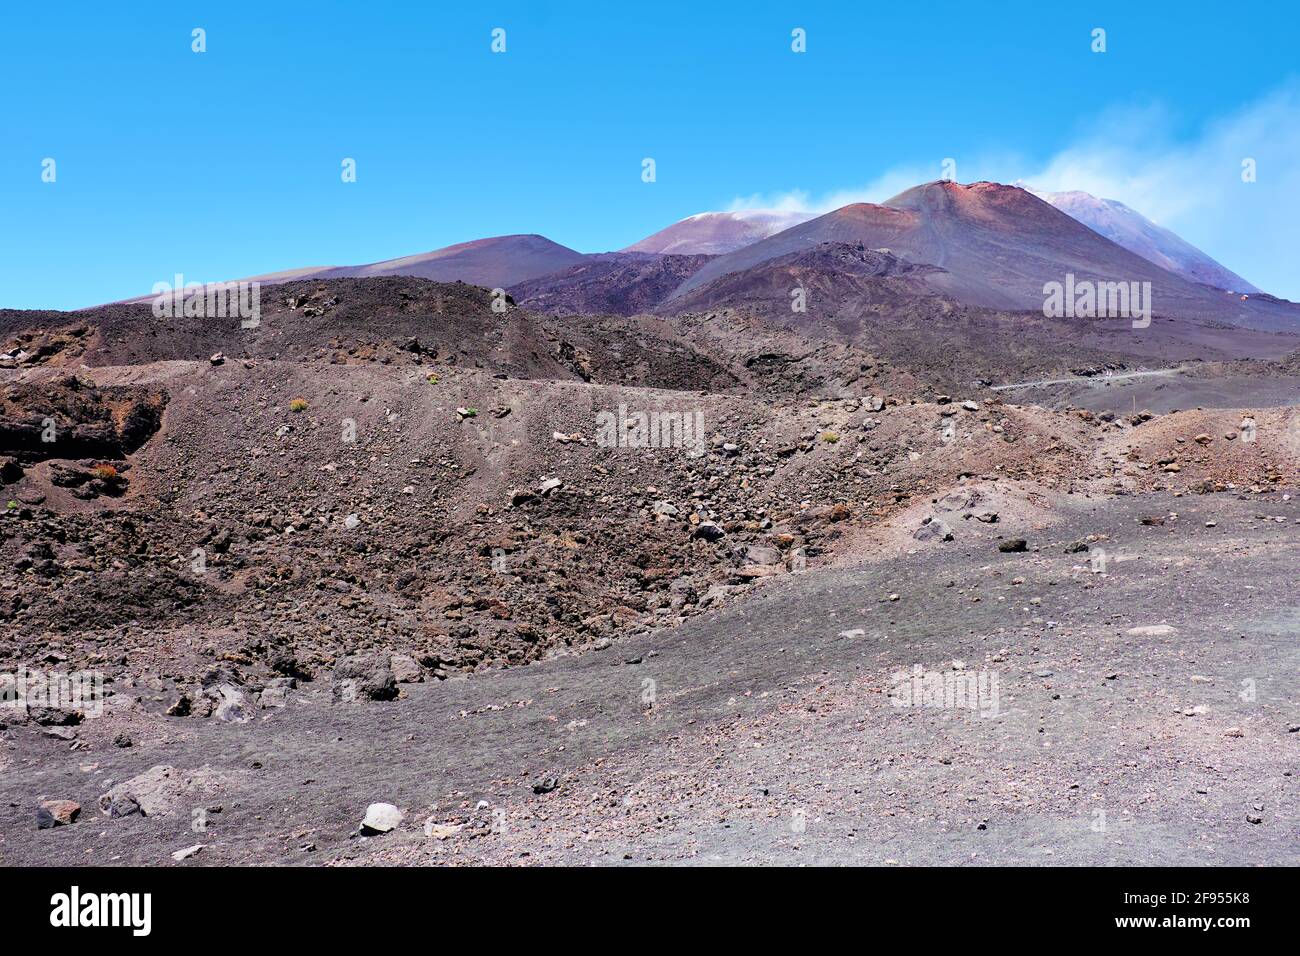 Mount Etna in Sicily near Catania, Tallest active volcano in Italy and whole Europe. Traces of volcanic activity, steam from craters. Stock Photo